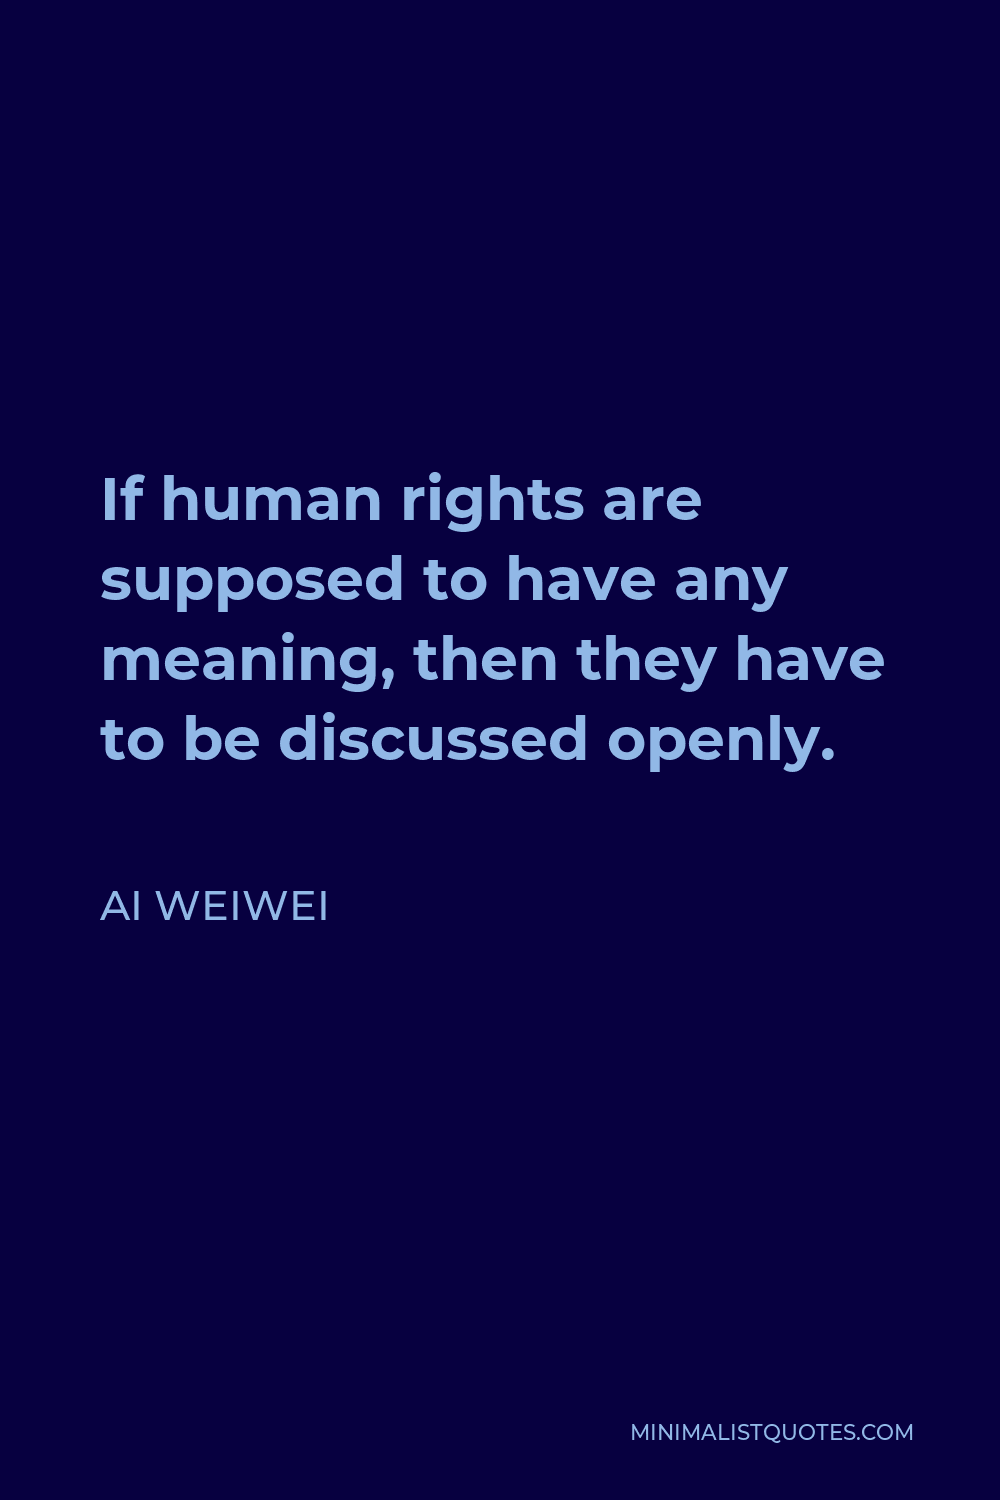 Ai Weiwei Quote - If human rights are supposed to have any meaning, then they have to be discussed openly.